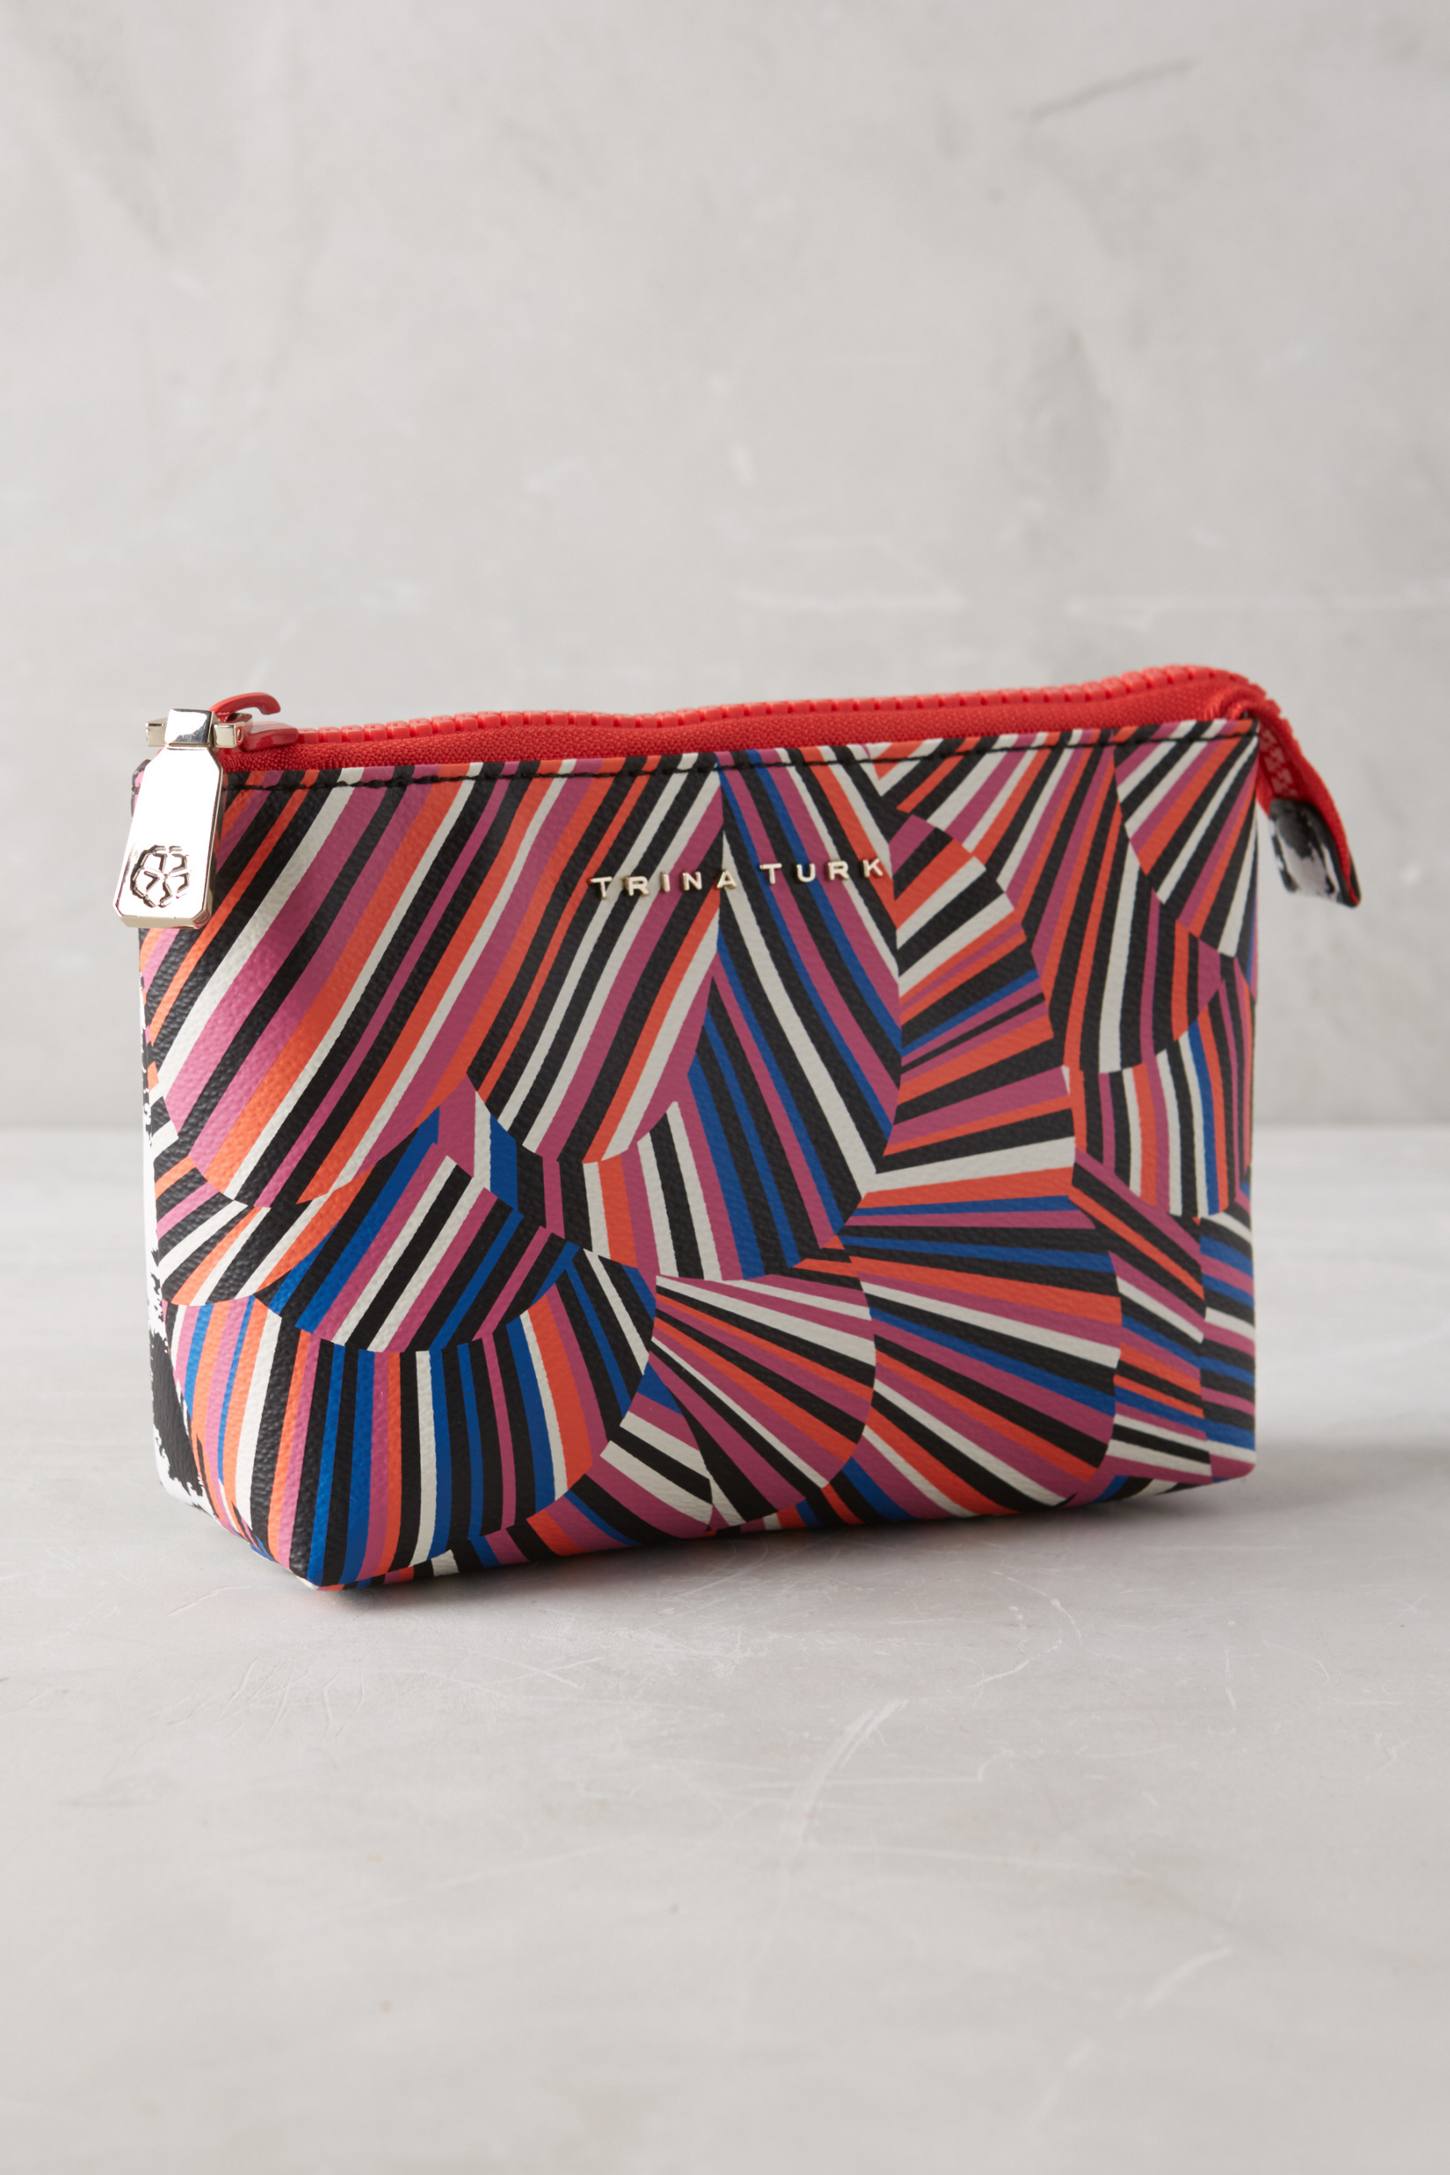 Anthropologie's New Arrivals: Pouches & Cases - Topista